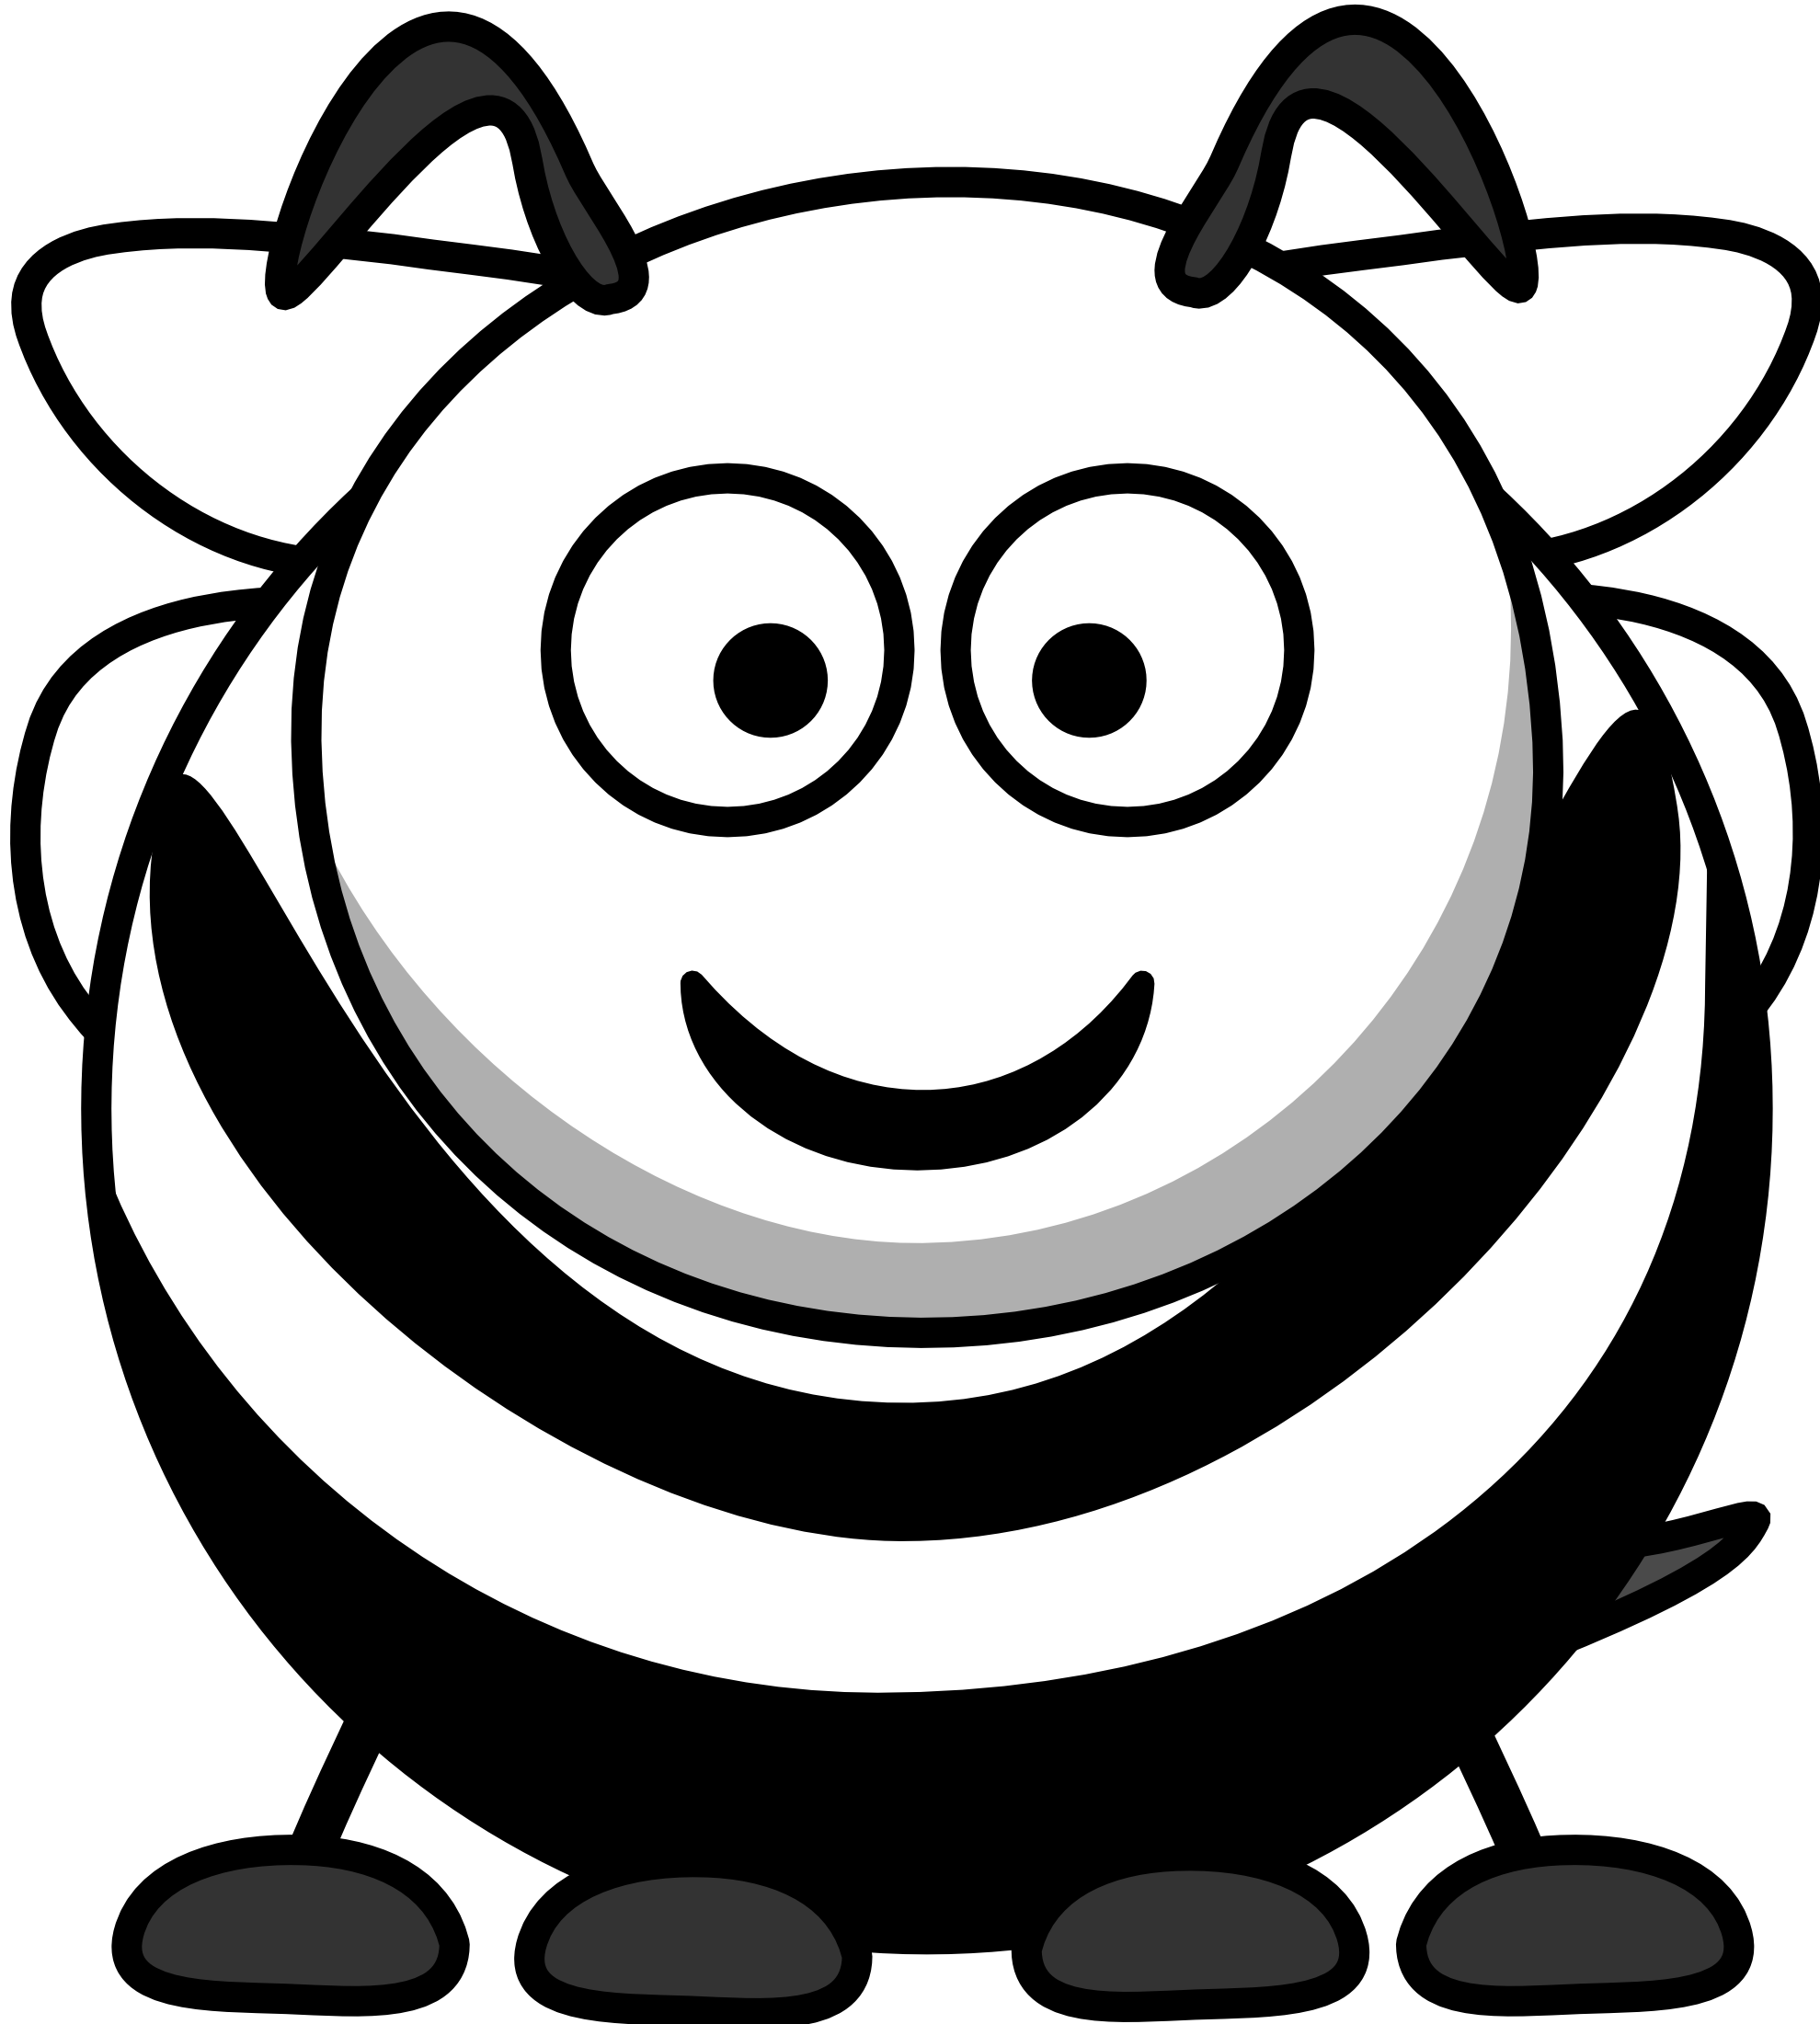 Bee  black and white bee clipart black and white free images 3